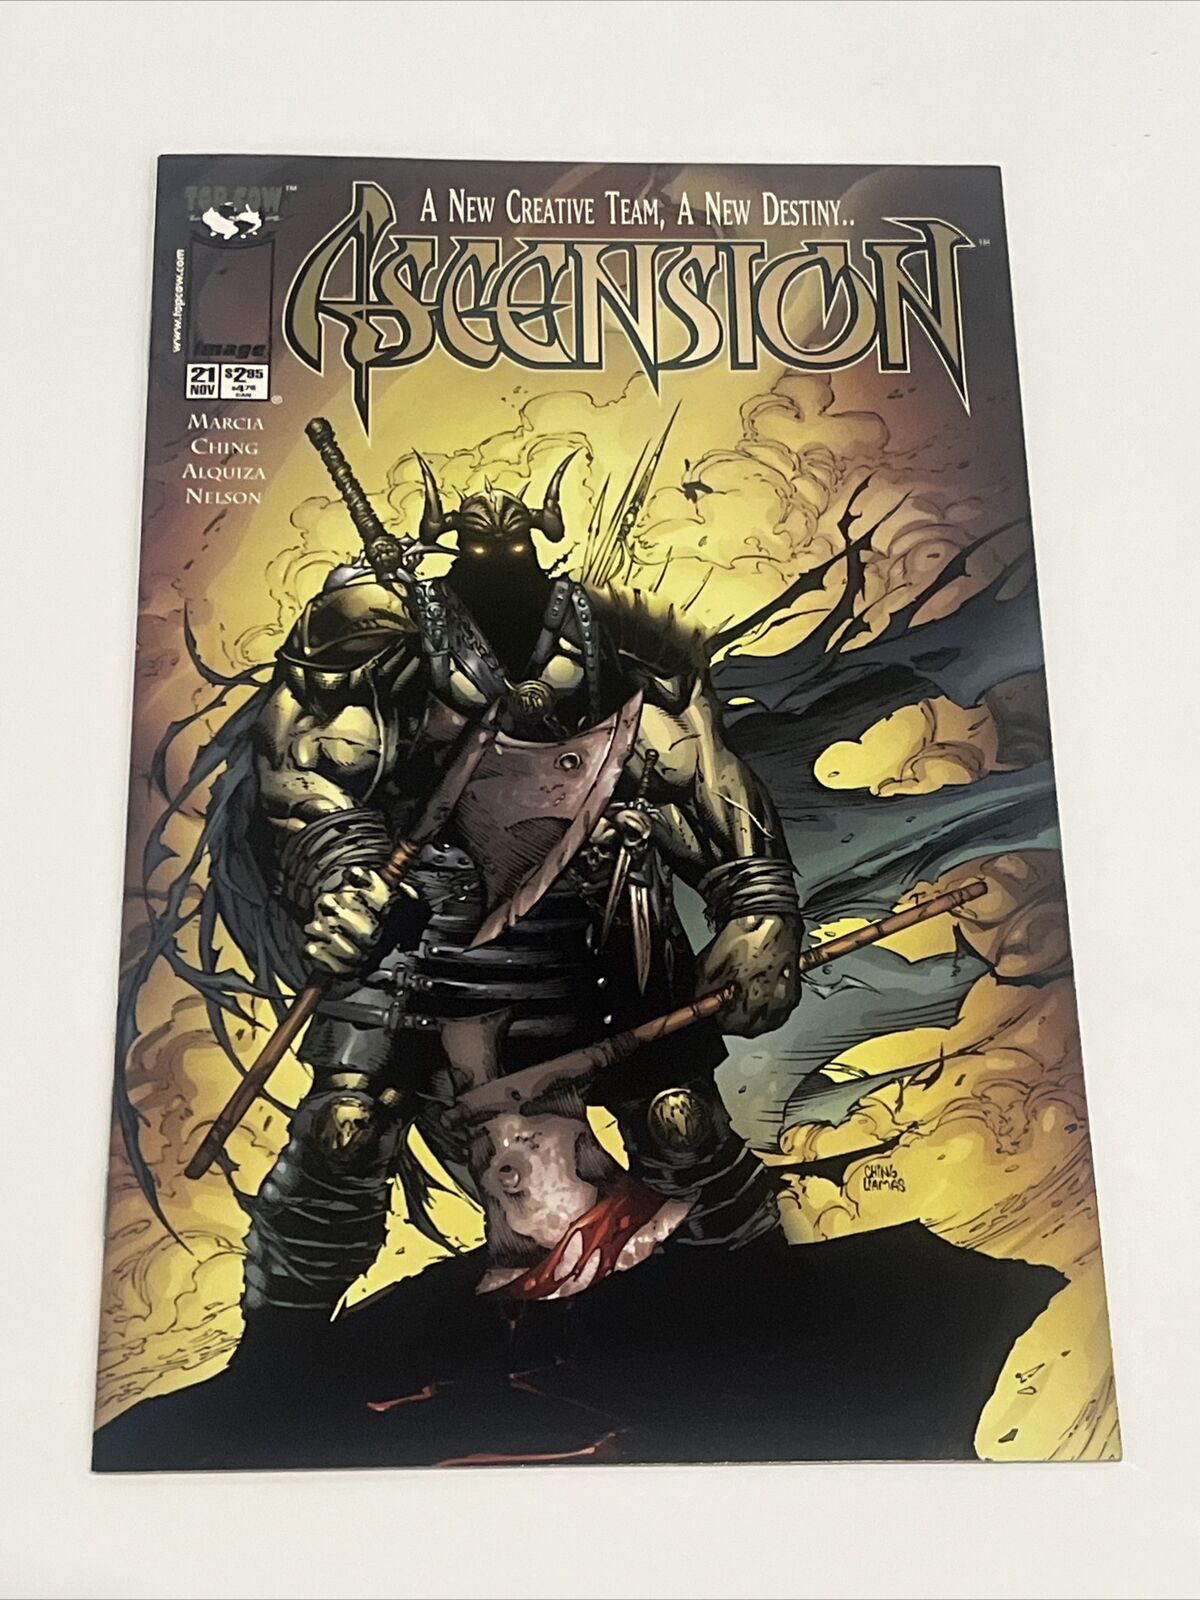 Ascension #21 Top Cow 1999